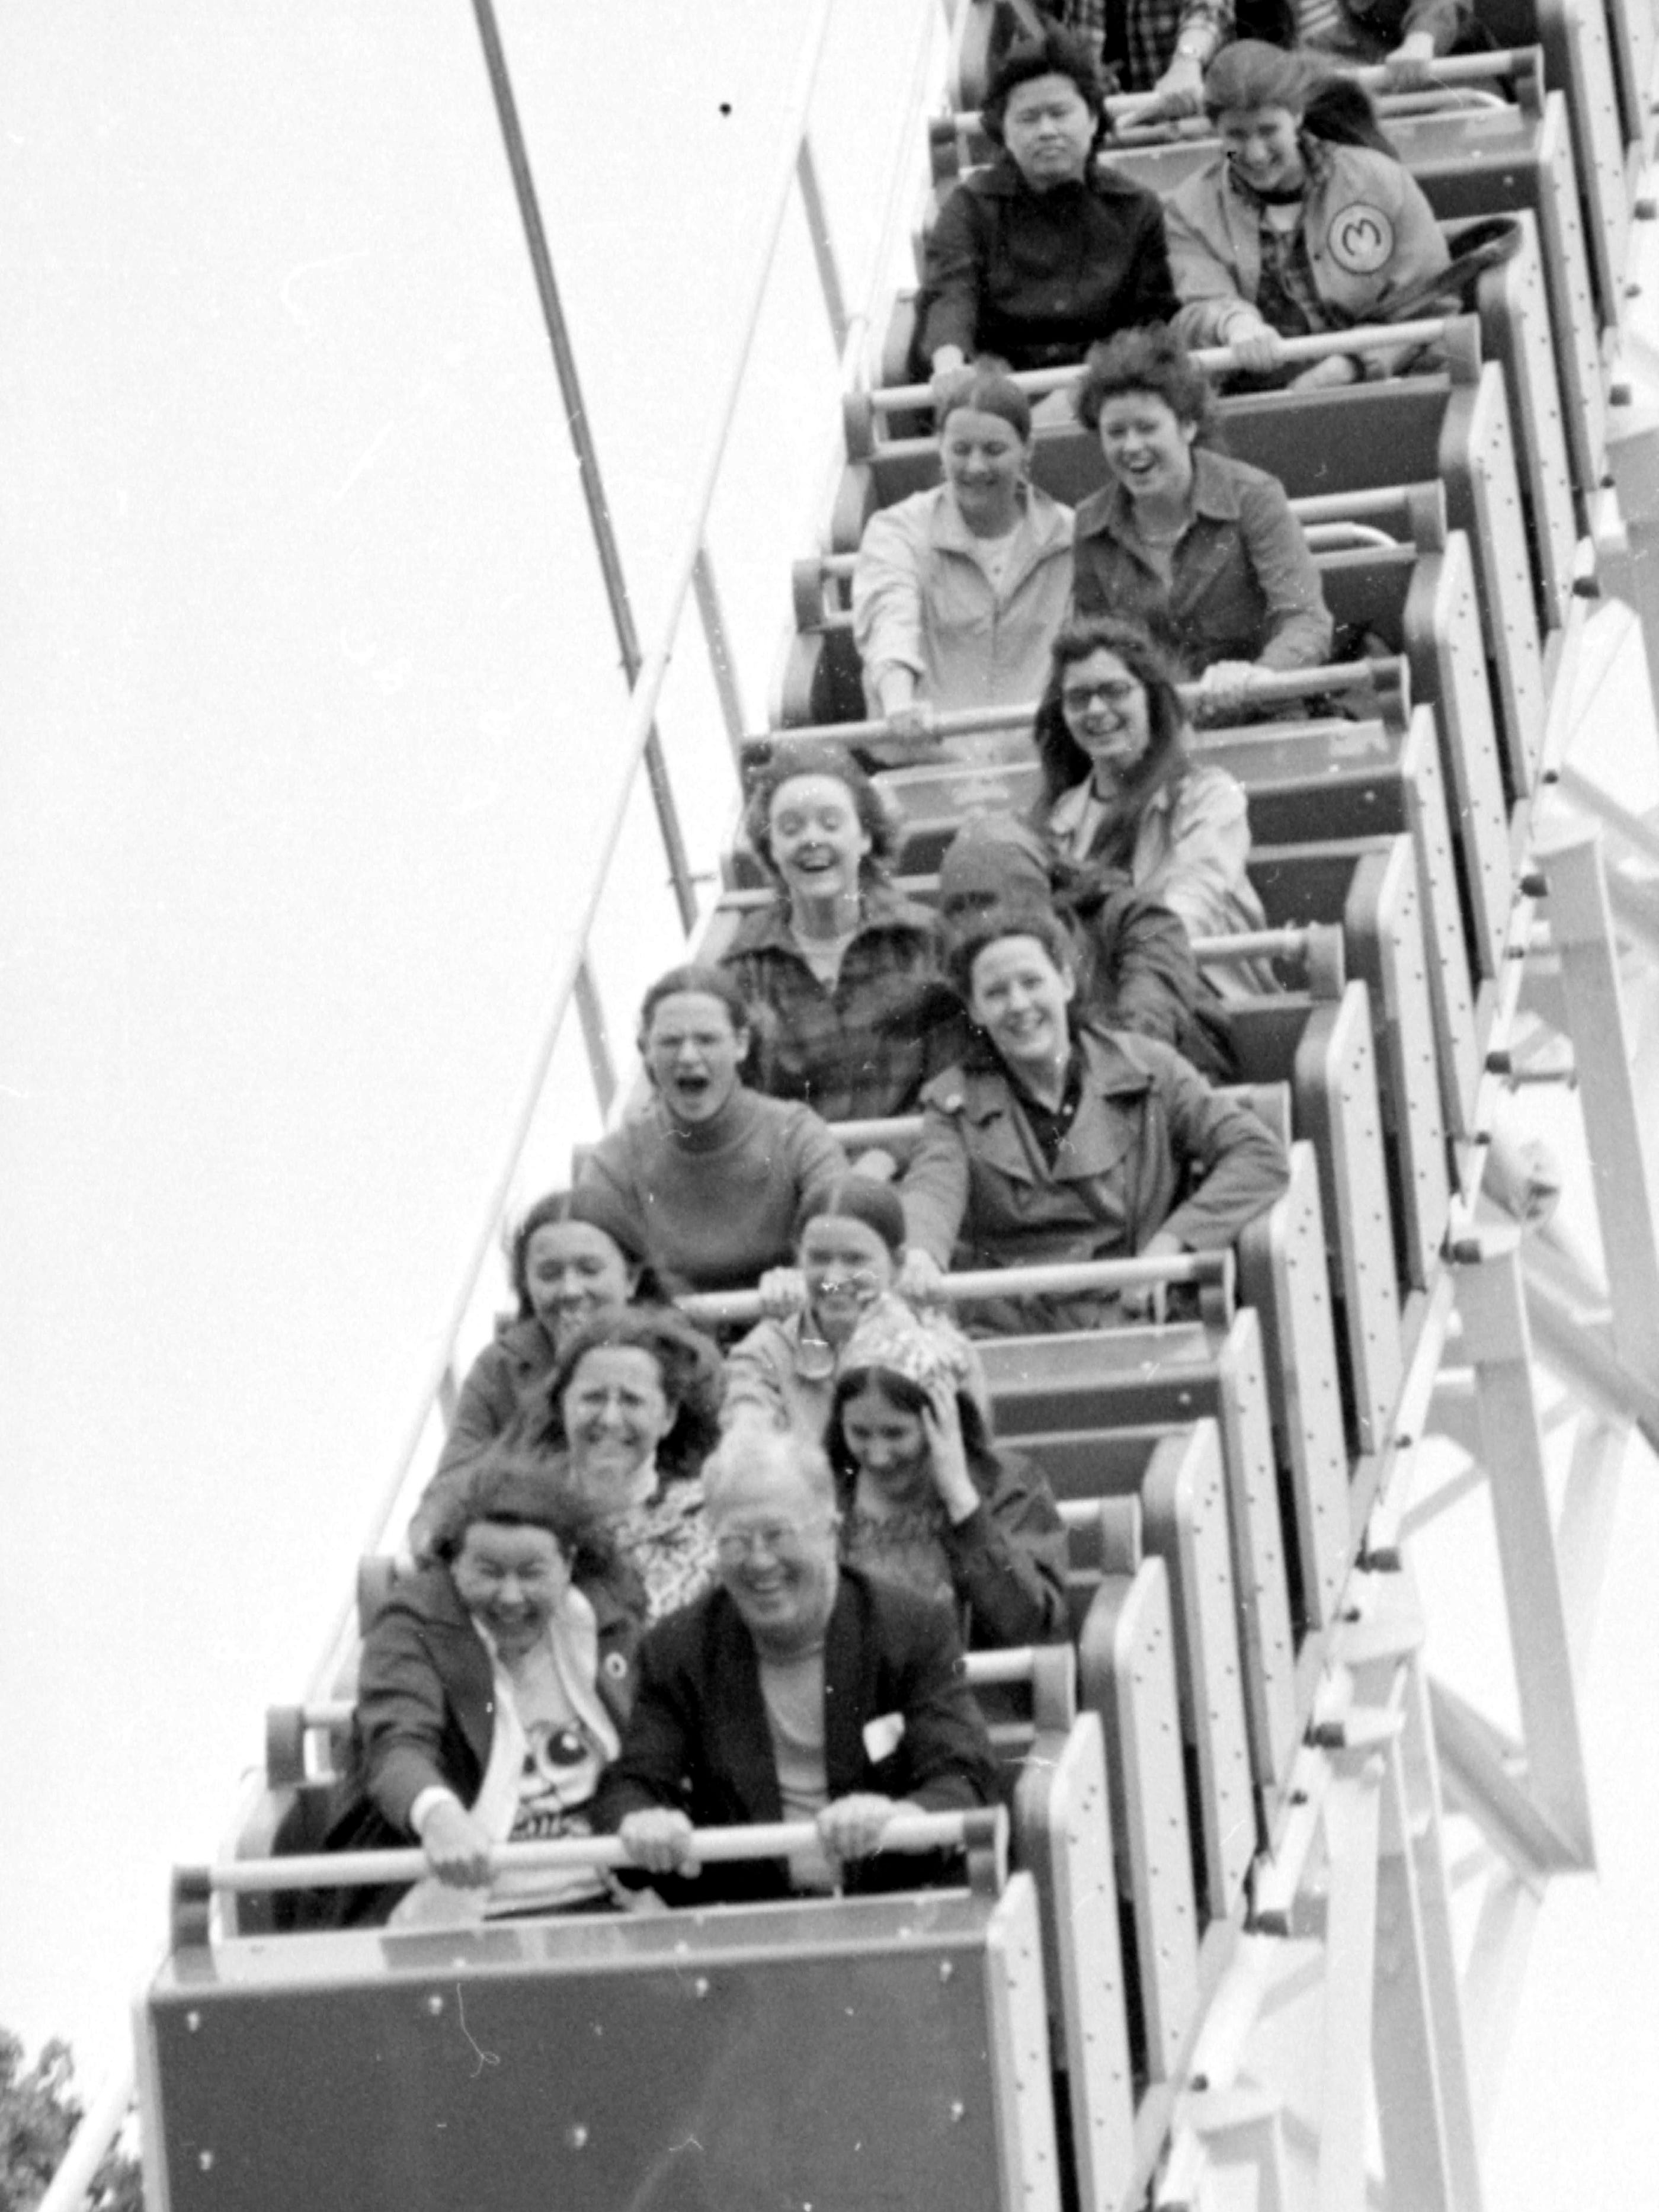 Thrill-seekers try Boblo's new roller coaster in May 1973.